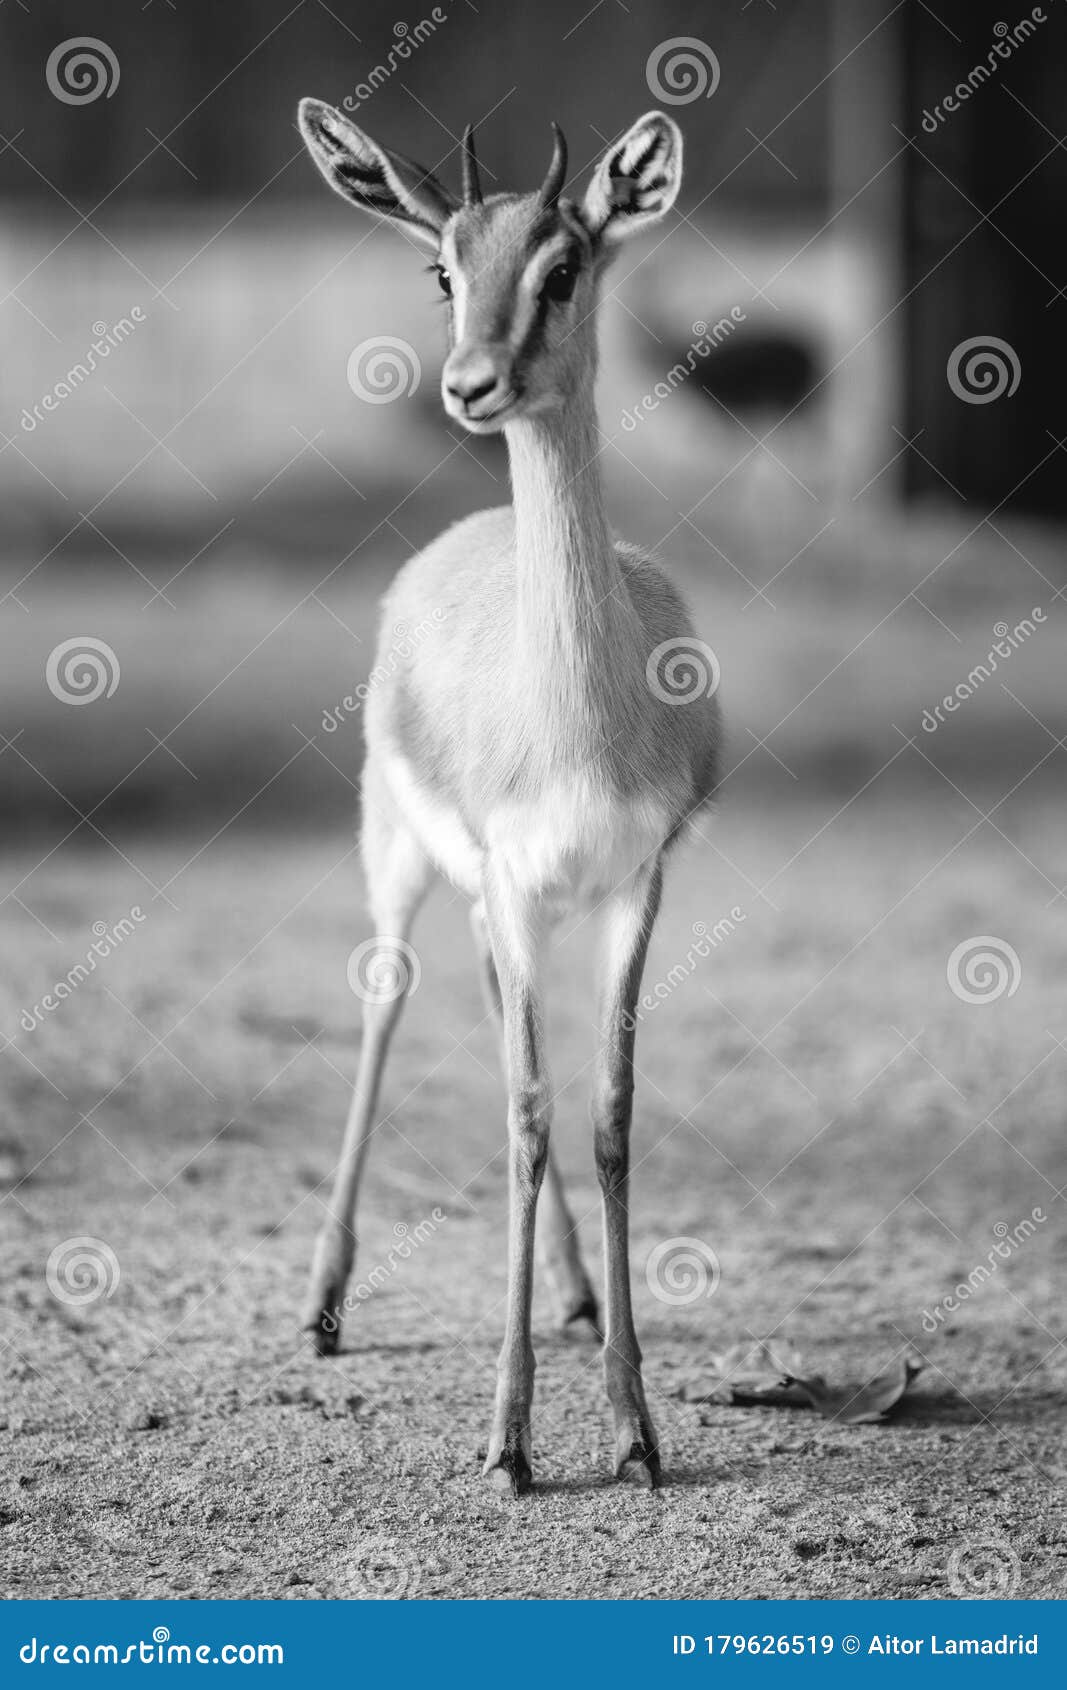 Vertical Black and White Gazelle Portrait Stock Image - Image of beautiful,  horns: 179626519